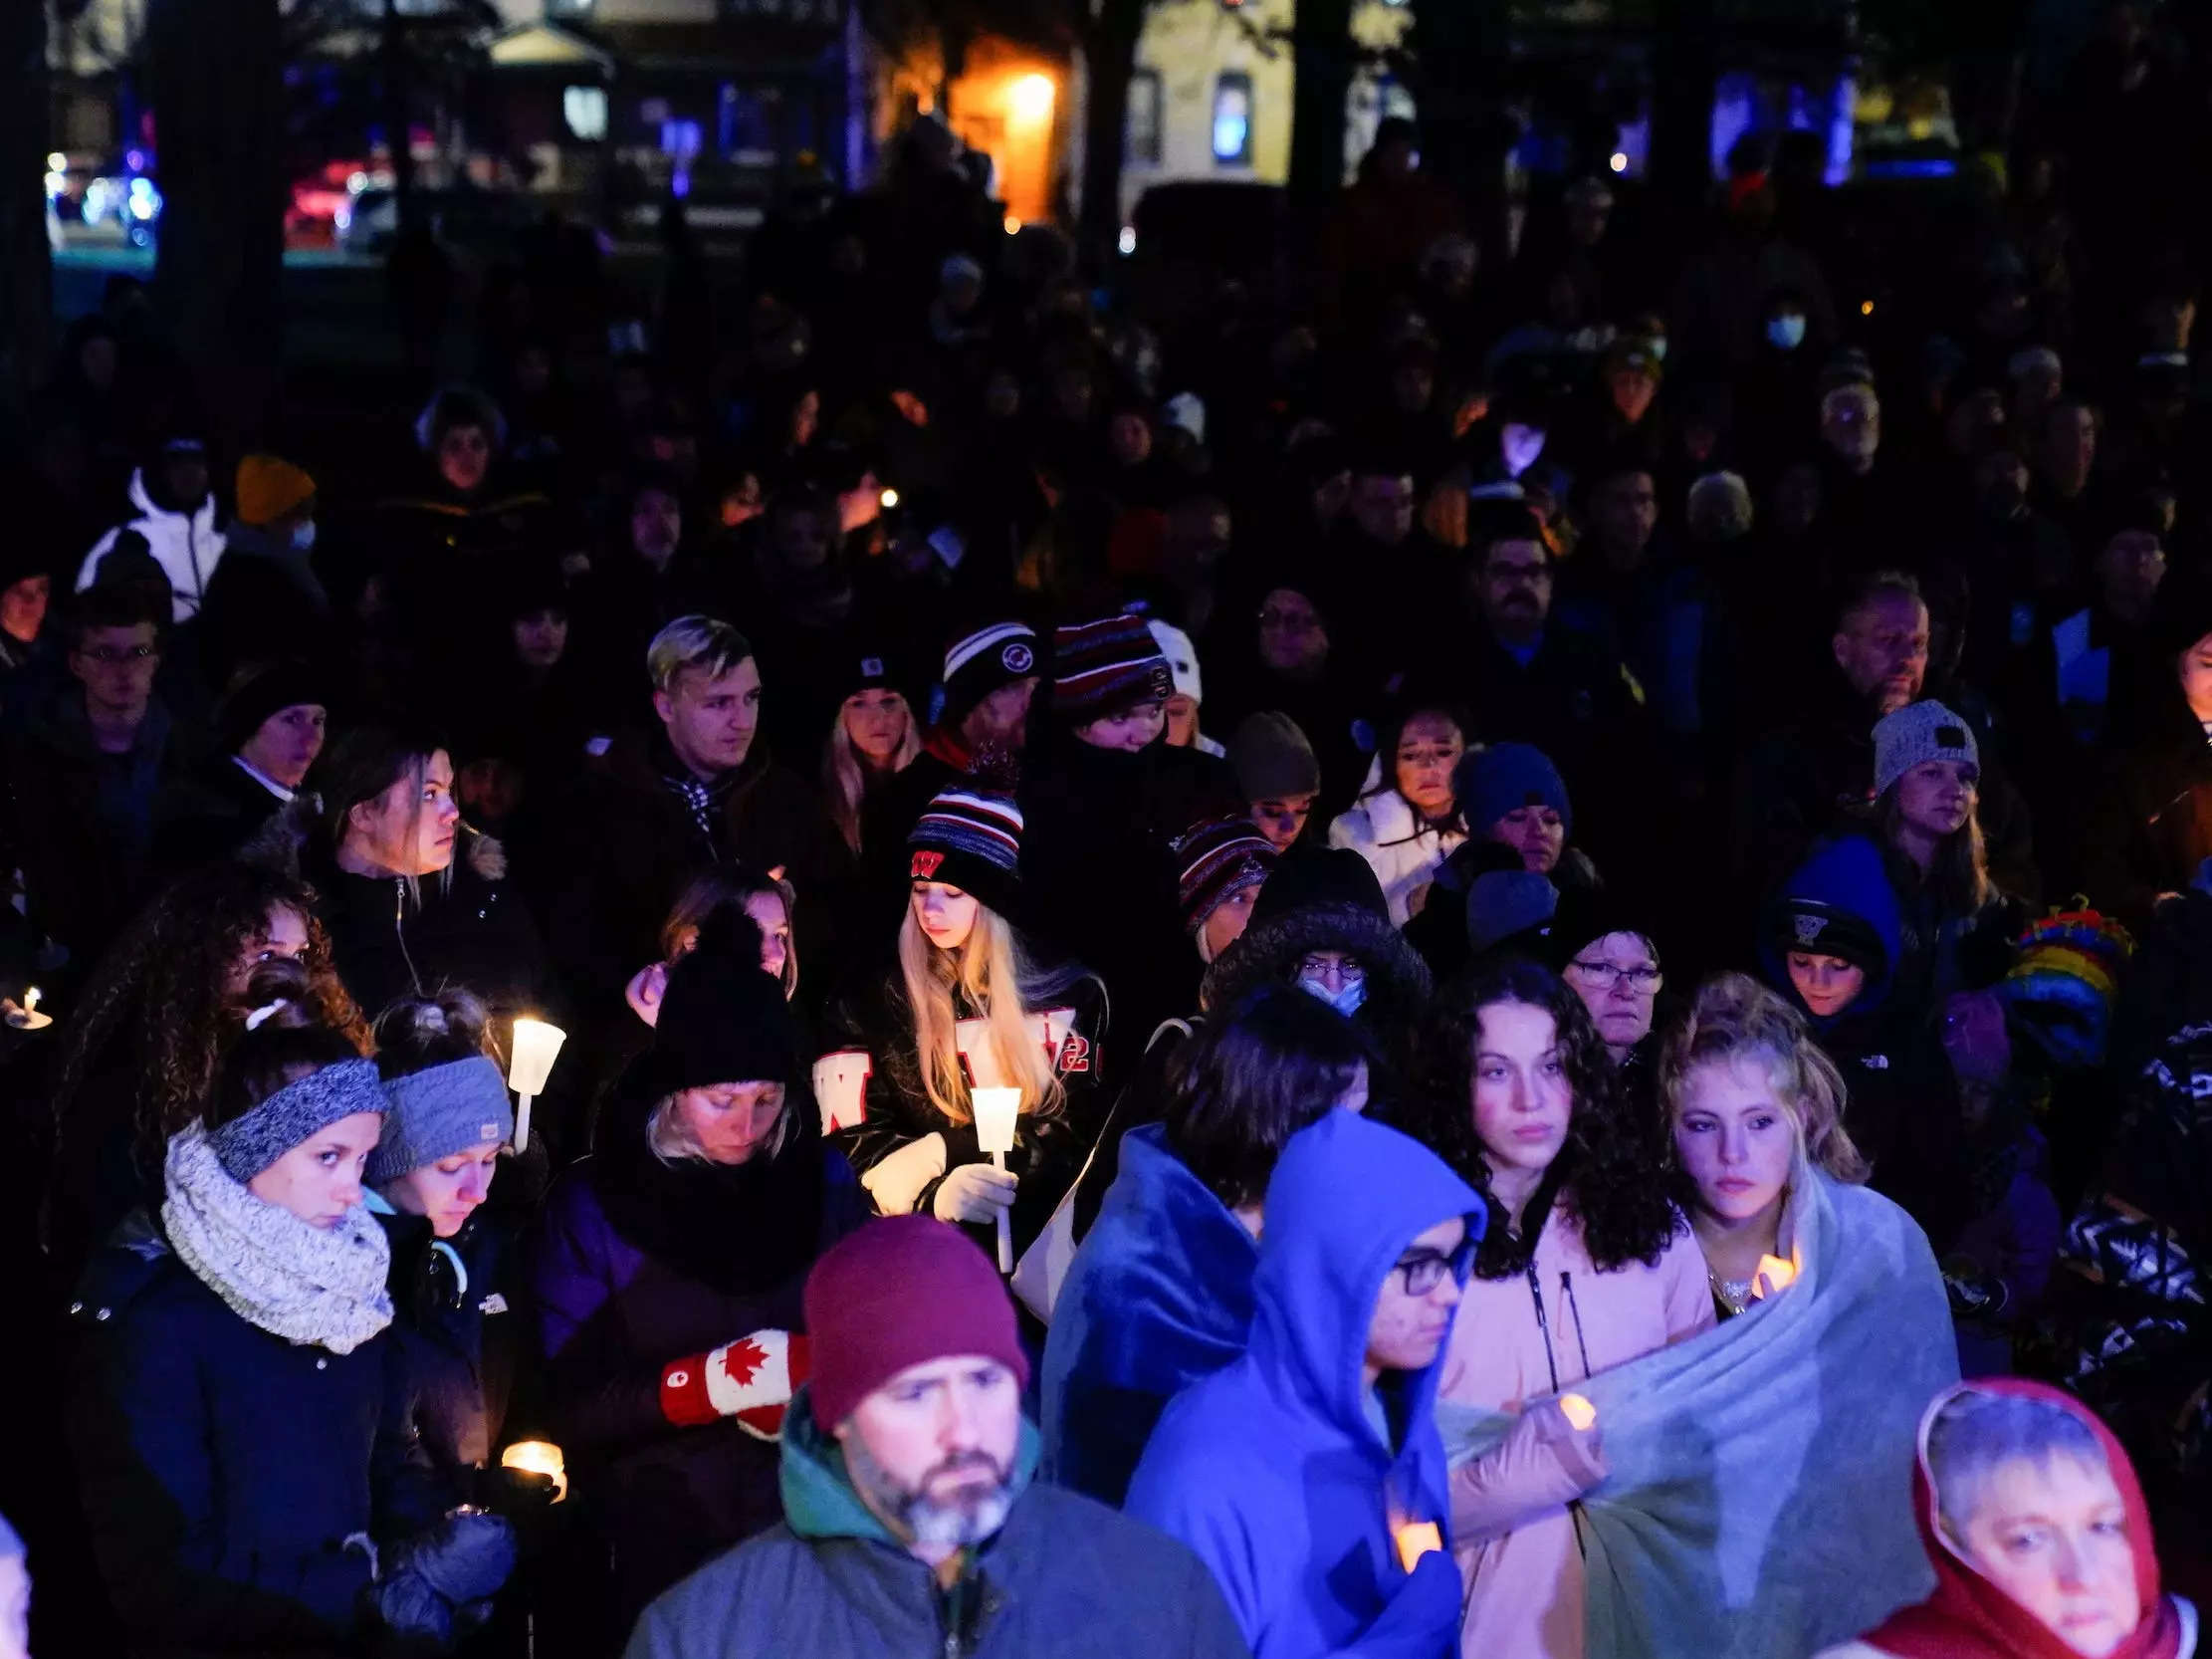 Community members mourn during a candle light vigil after a car plowed through a holiday parade in Waukesha, Wisconsin